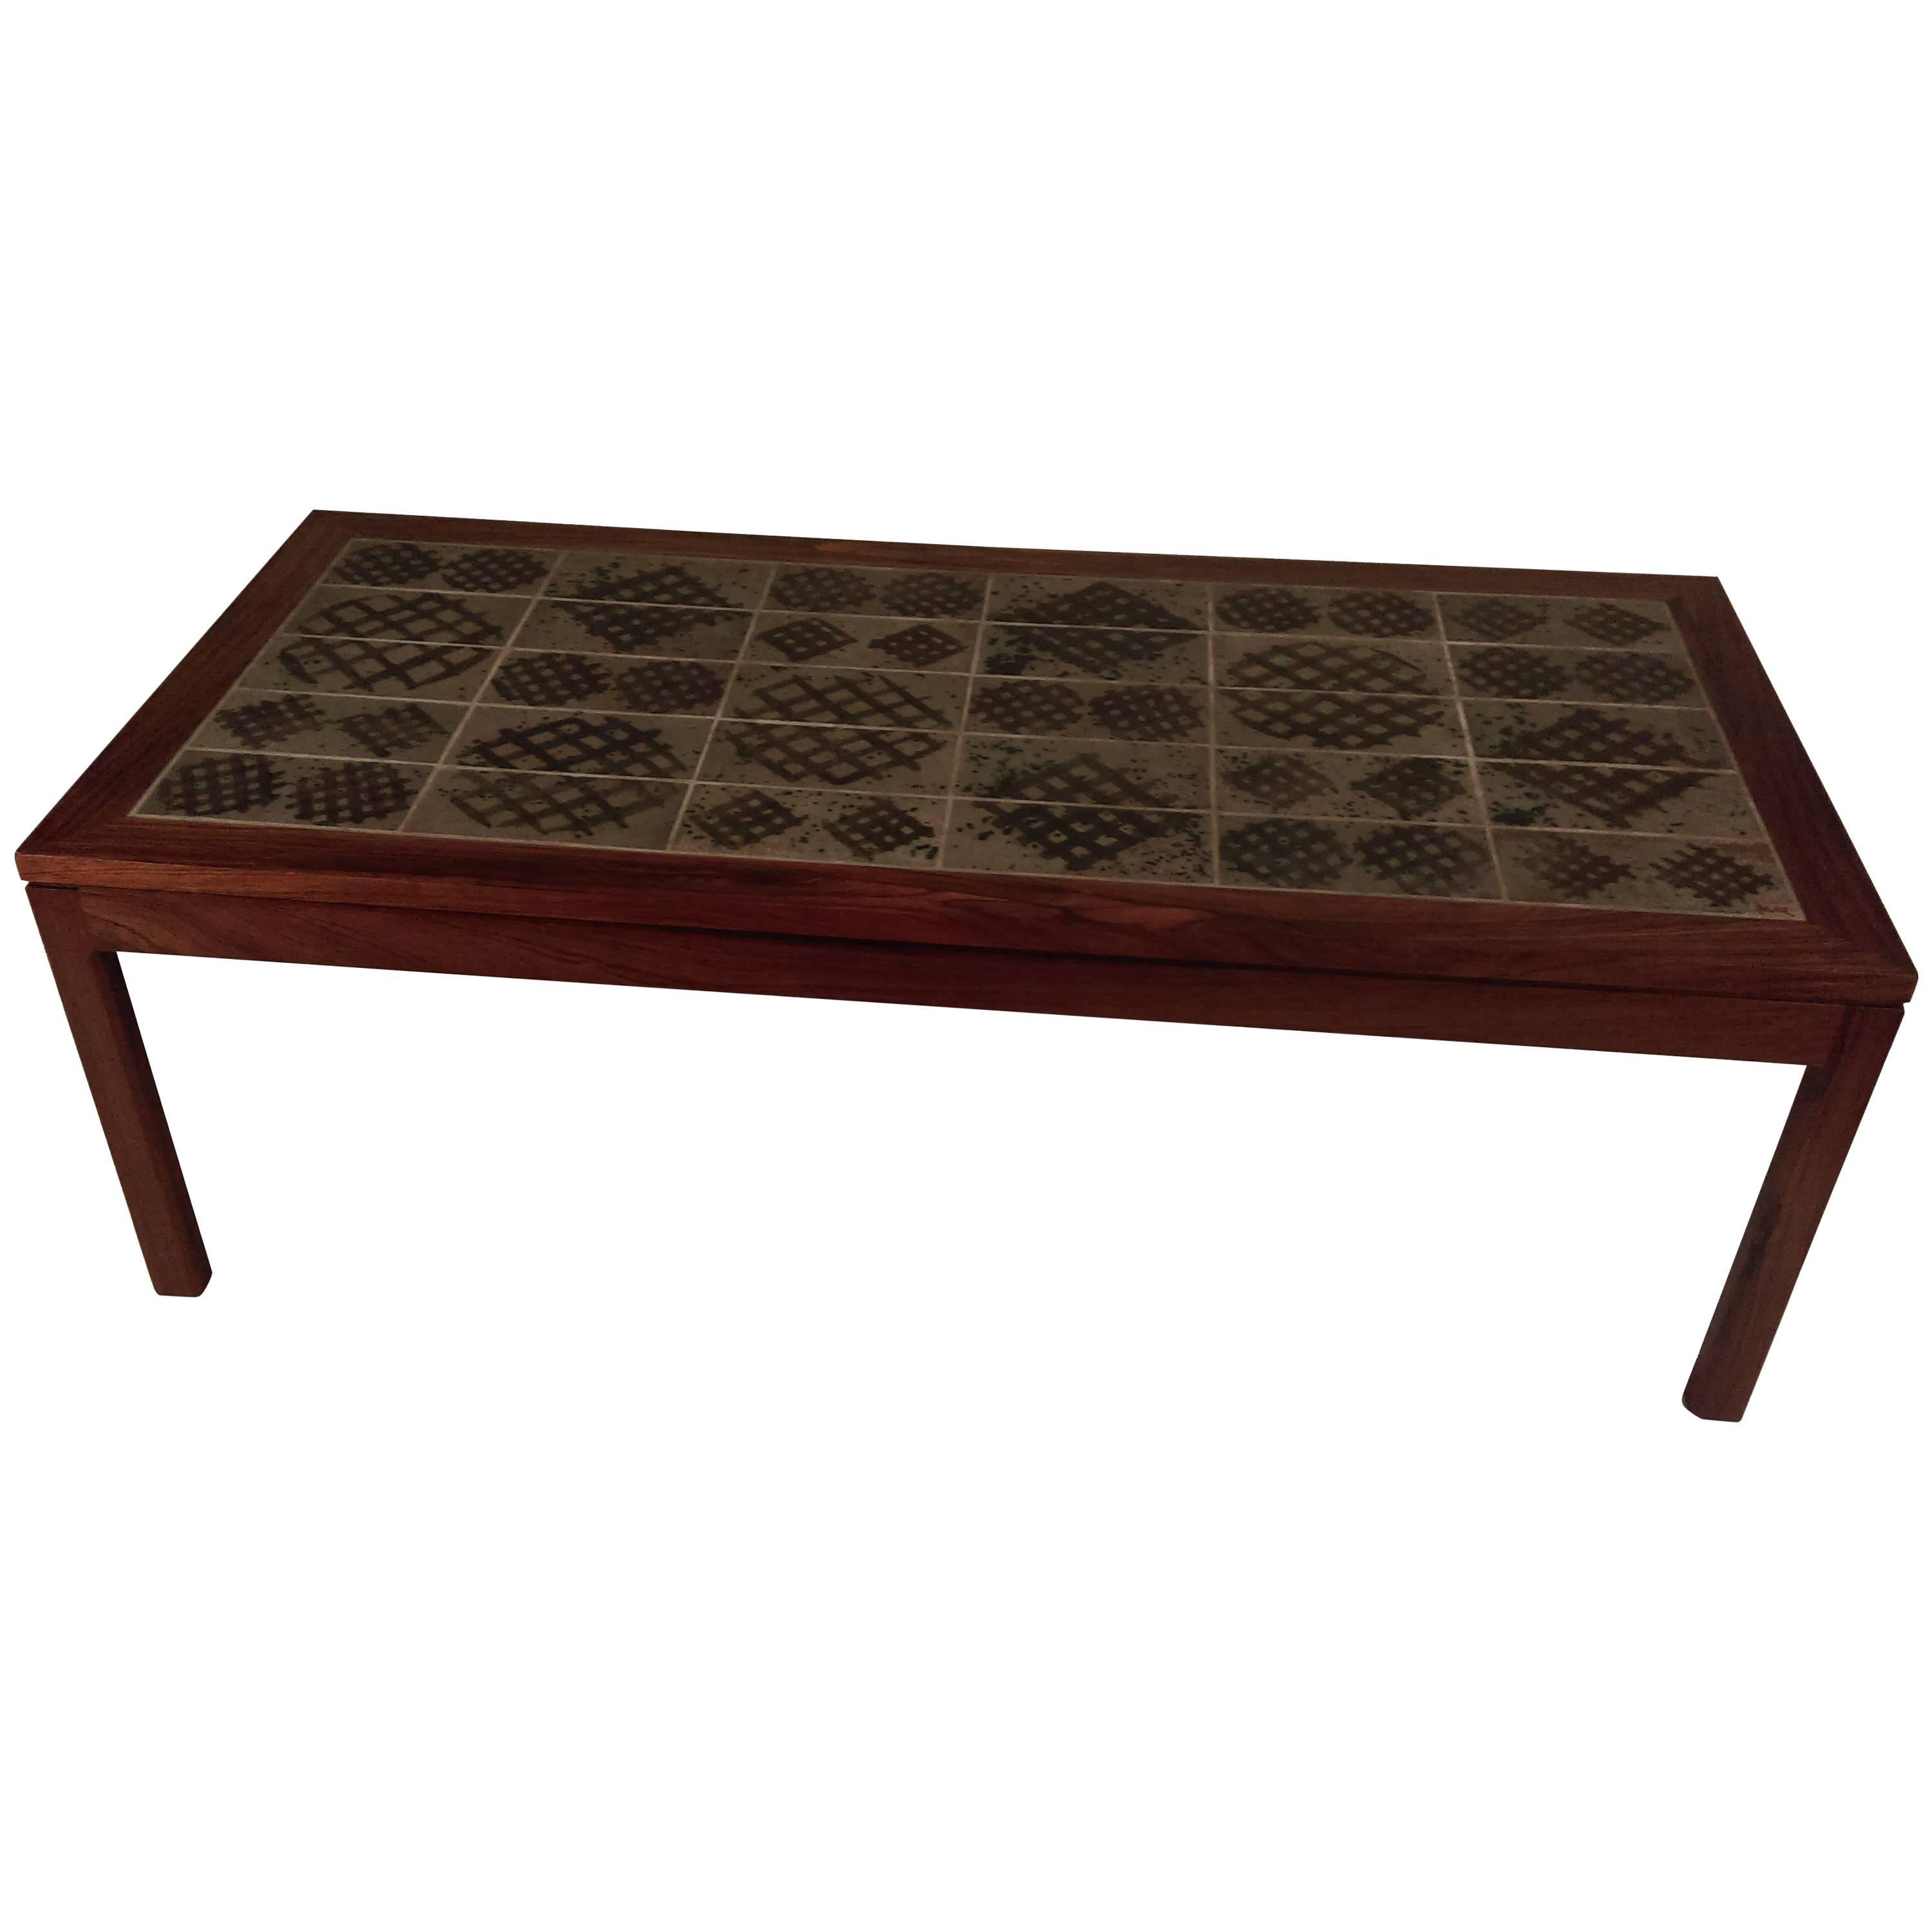 1960s Tue Poulsen Tile Topped Coffee Table in Rosewood